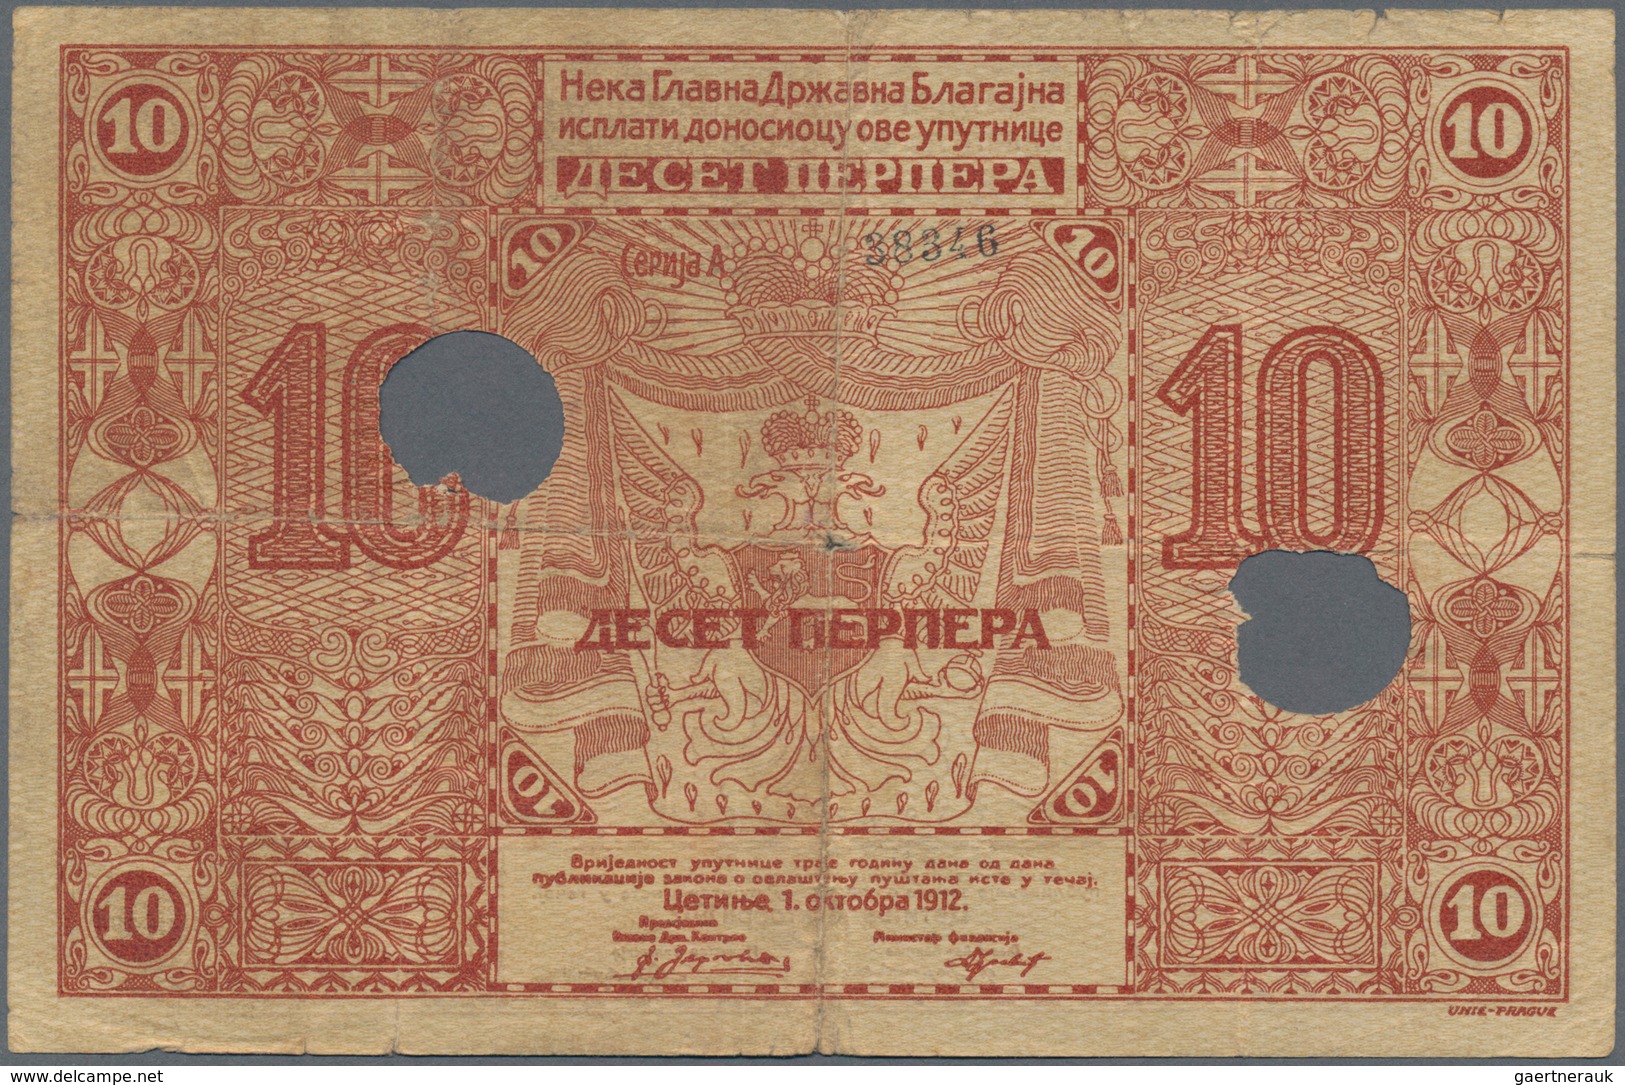 Montenegro: Very interesting lot with 15 banknotes 1 - 100 Perpera 1912-1917, comprising 2, 5, 10 Pe